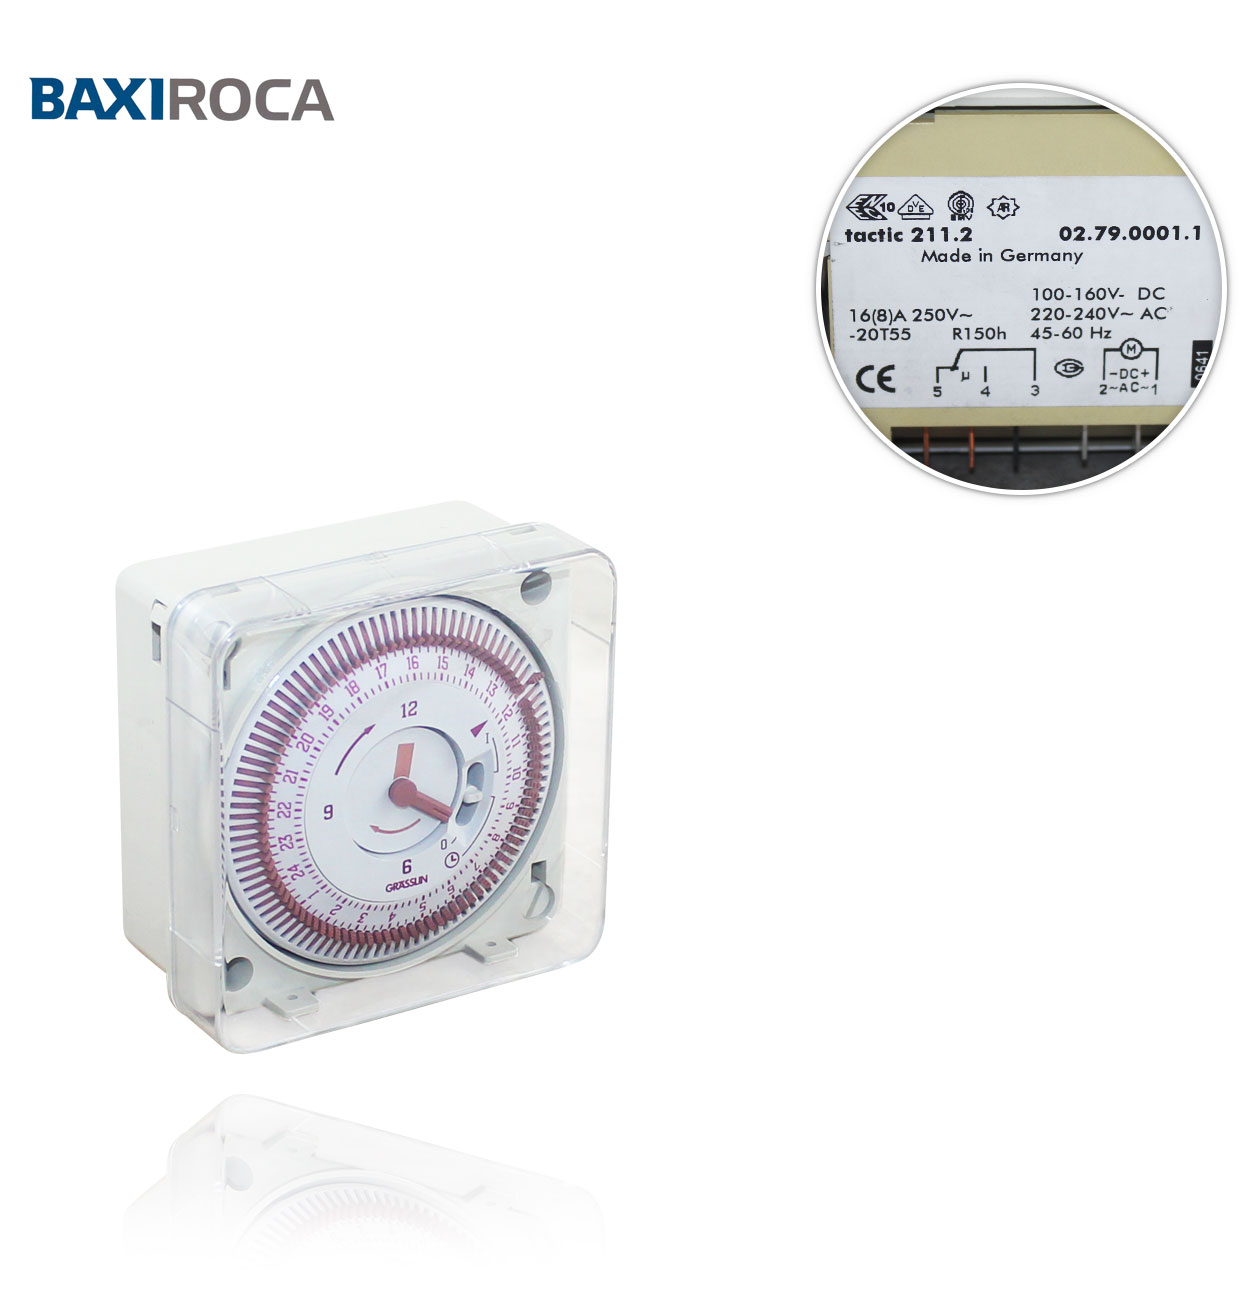 RECESSED DAILY TIME SWITCH GRASSLIN FOR AR ROCA